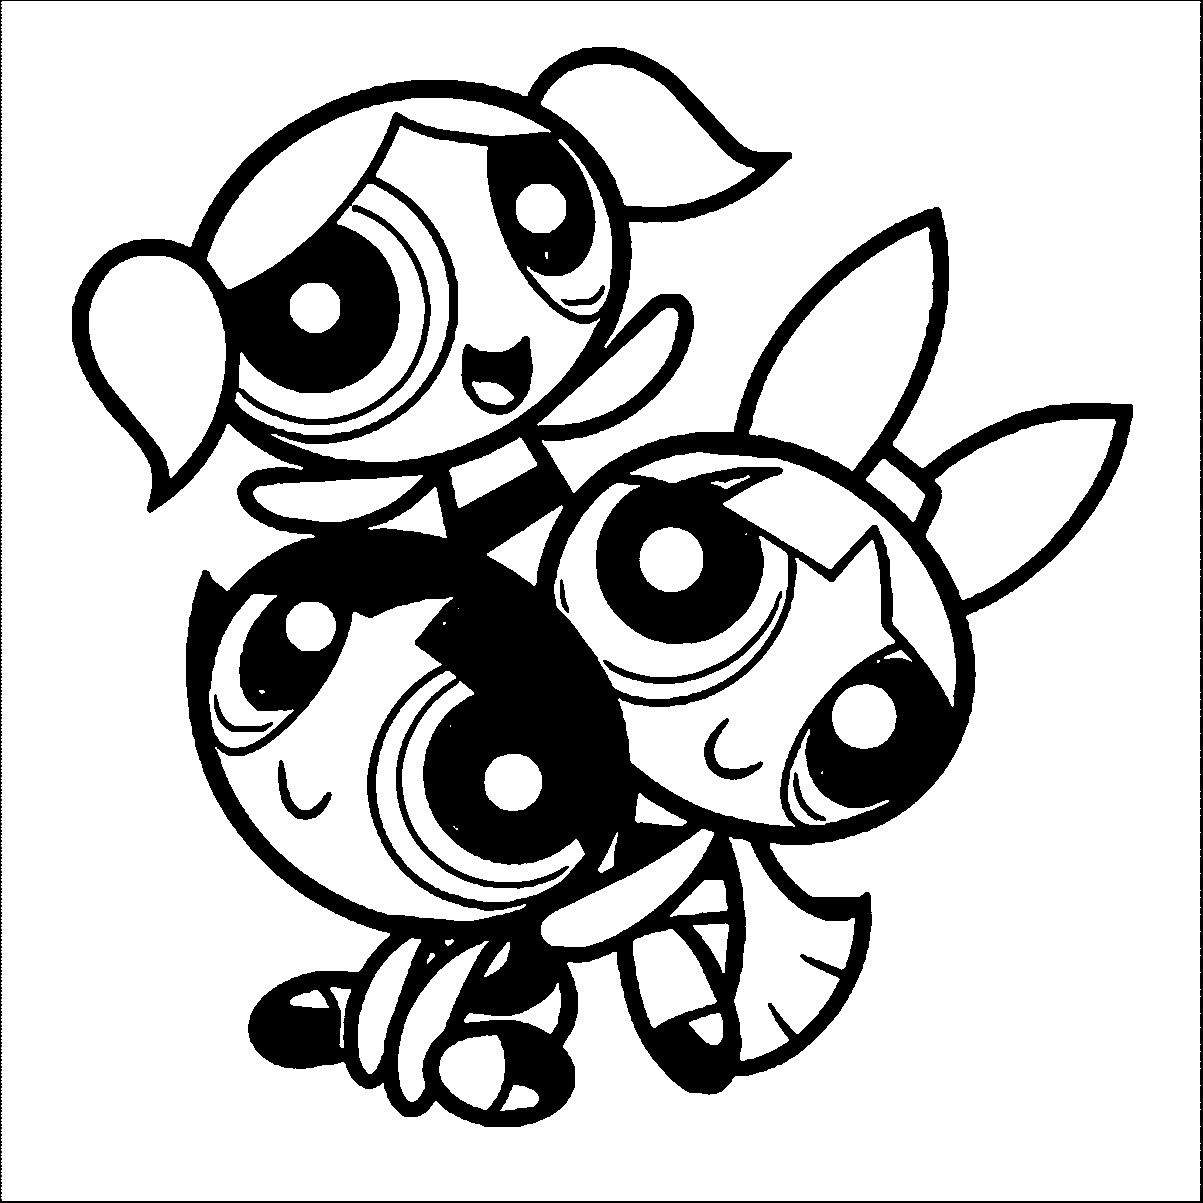 Powerpuff Girls Coloring Sheets
 Powerpuff Girls Coloring Pages